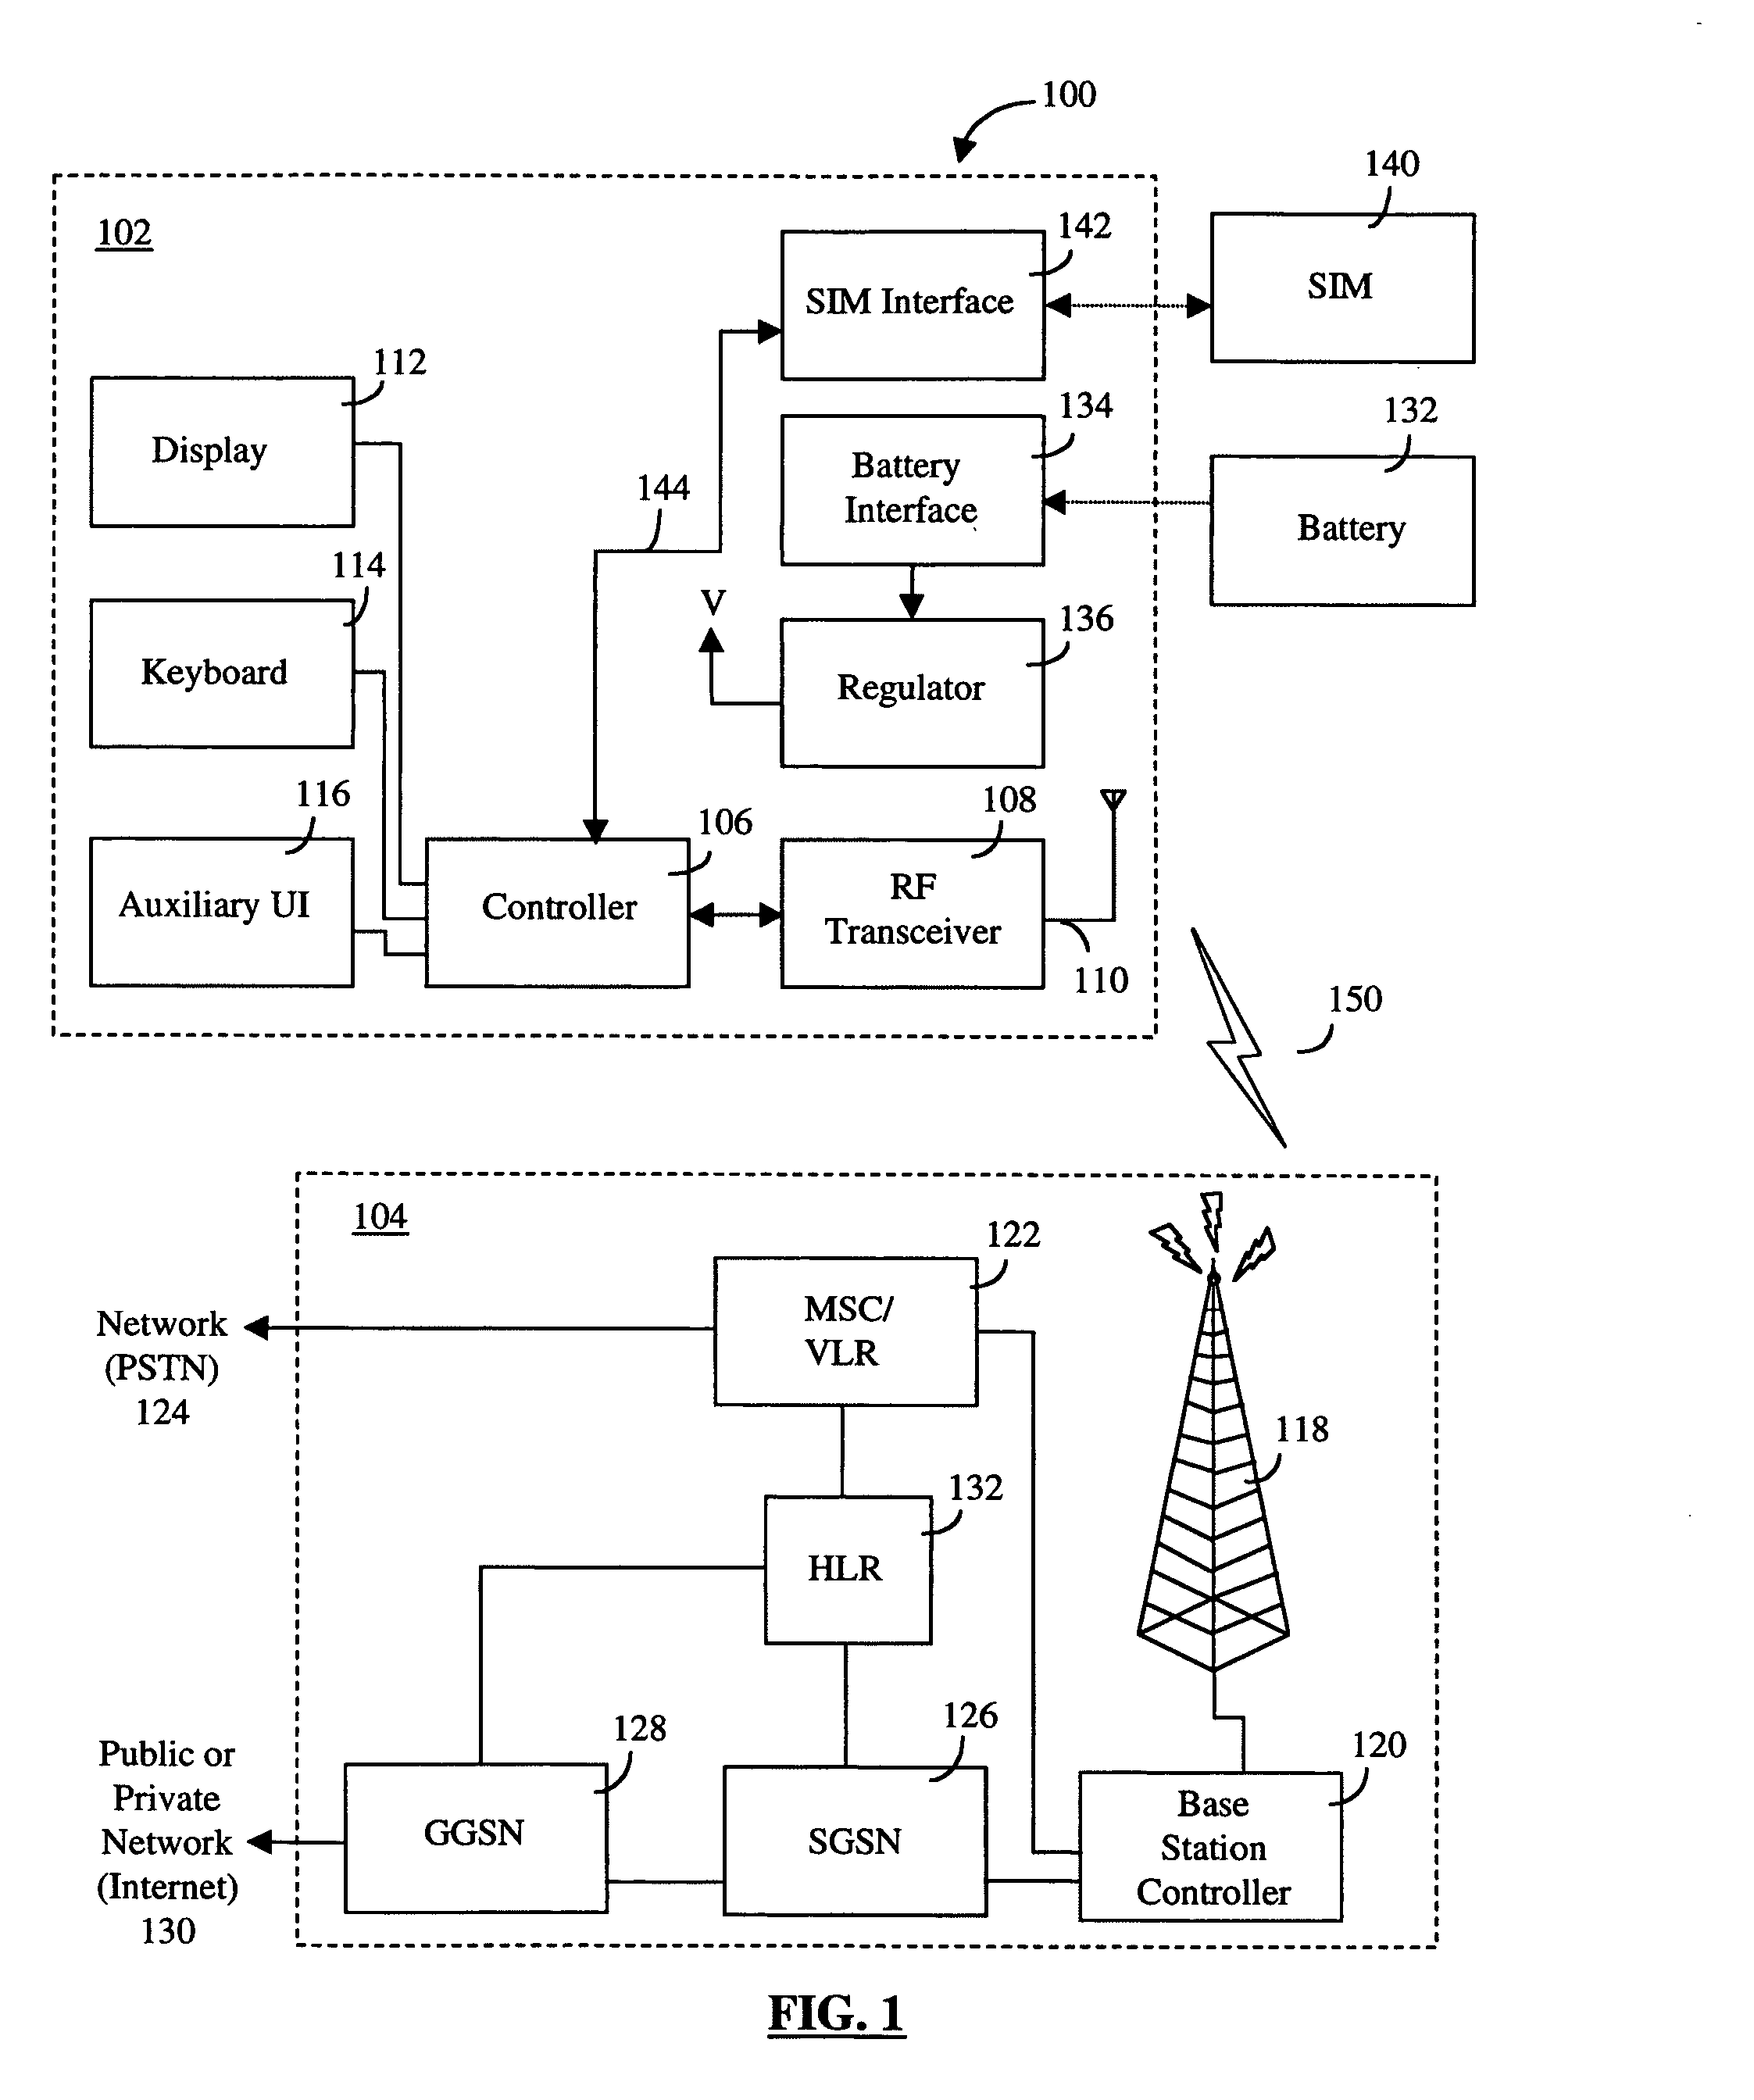 Apparatus and method for processing web service descriptions